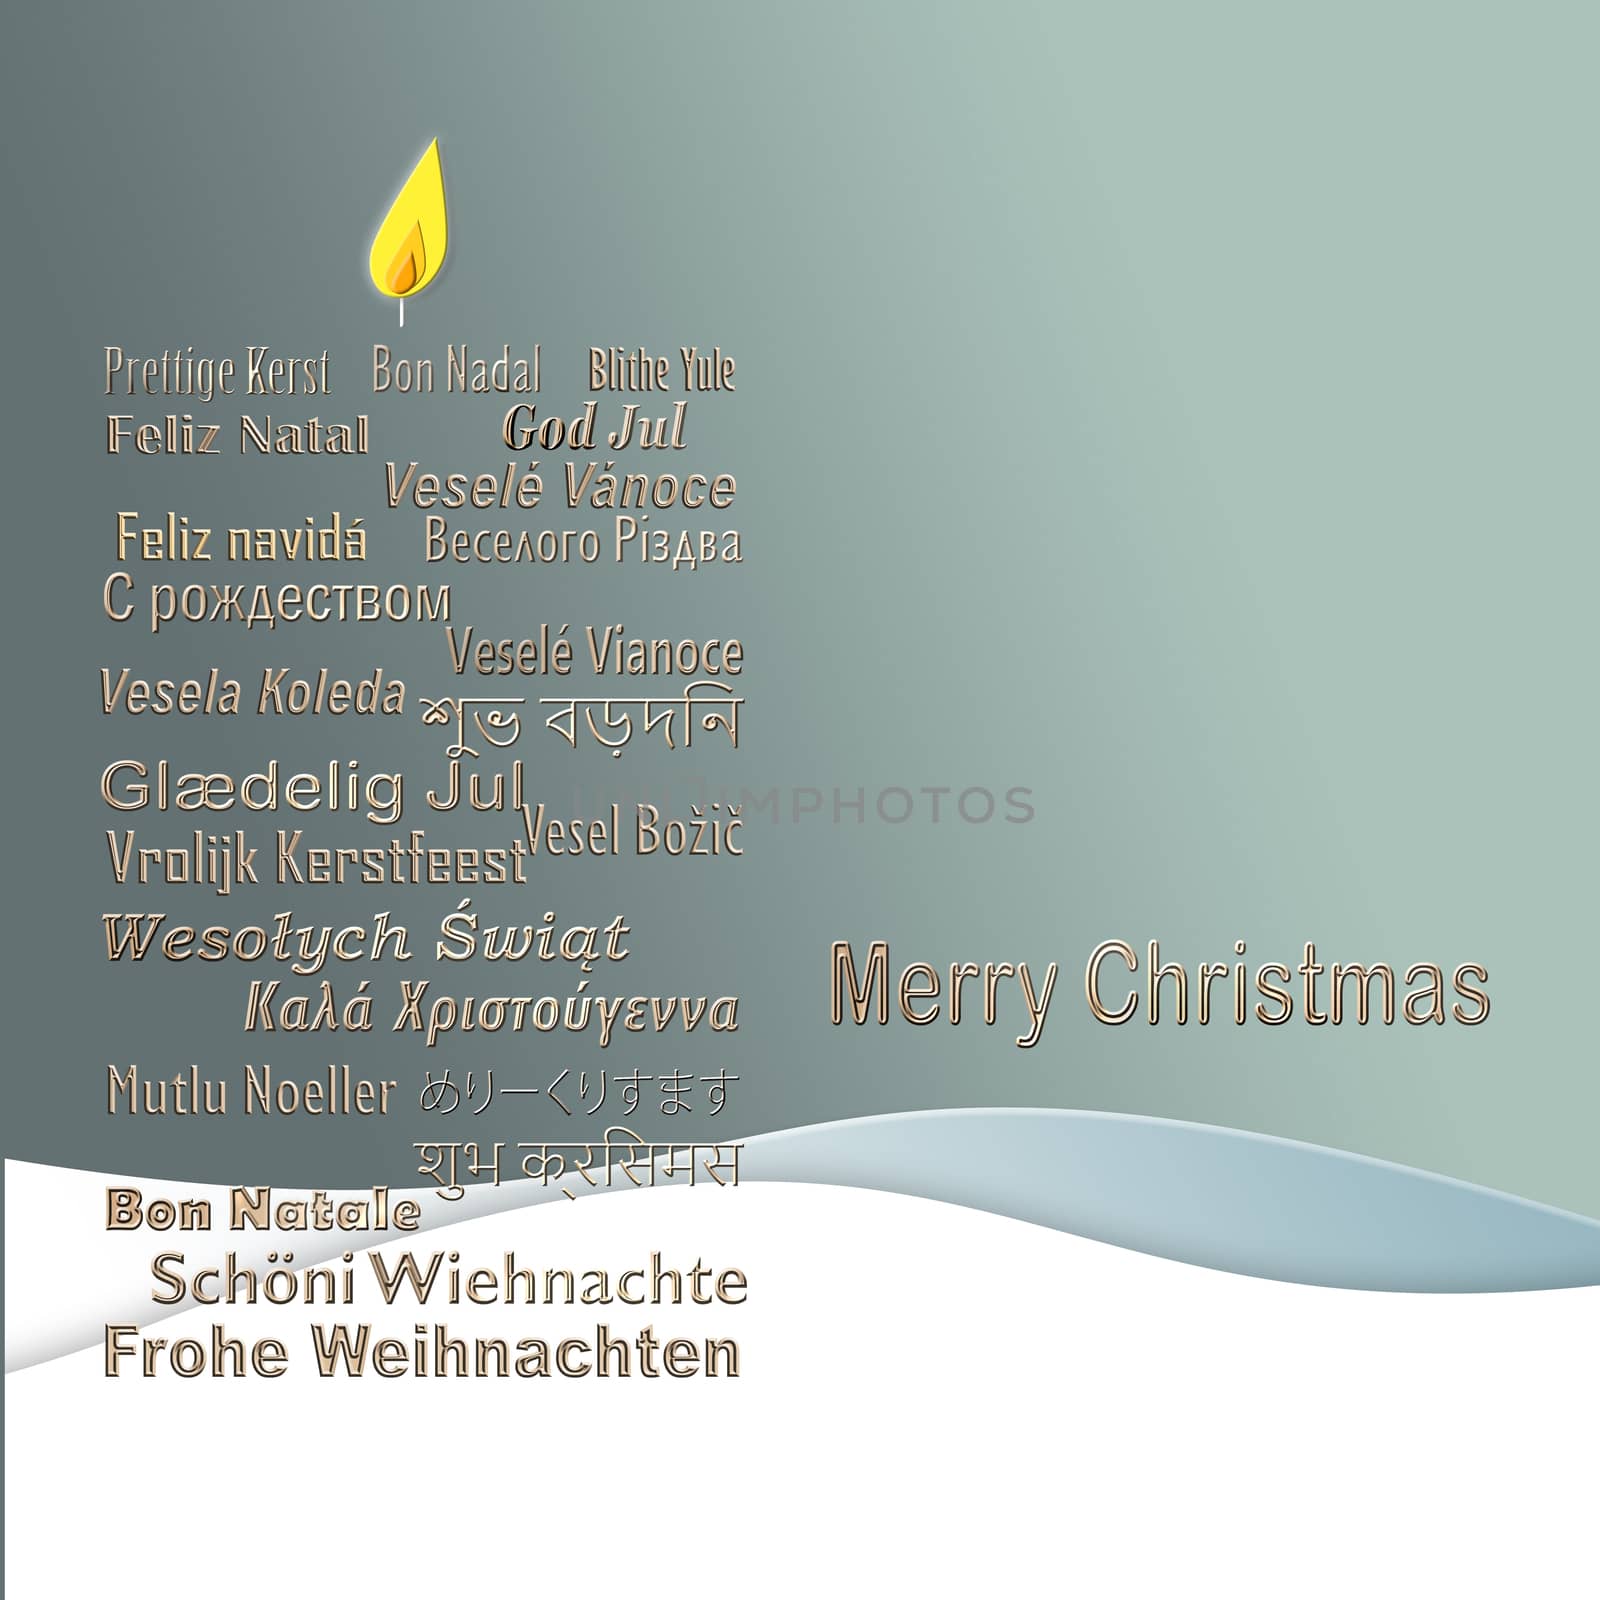 Merry Christmas wishes card in different languages by NelliPolk